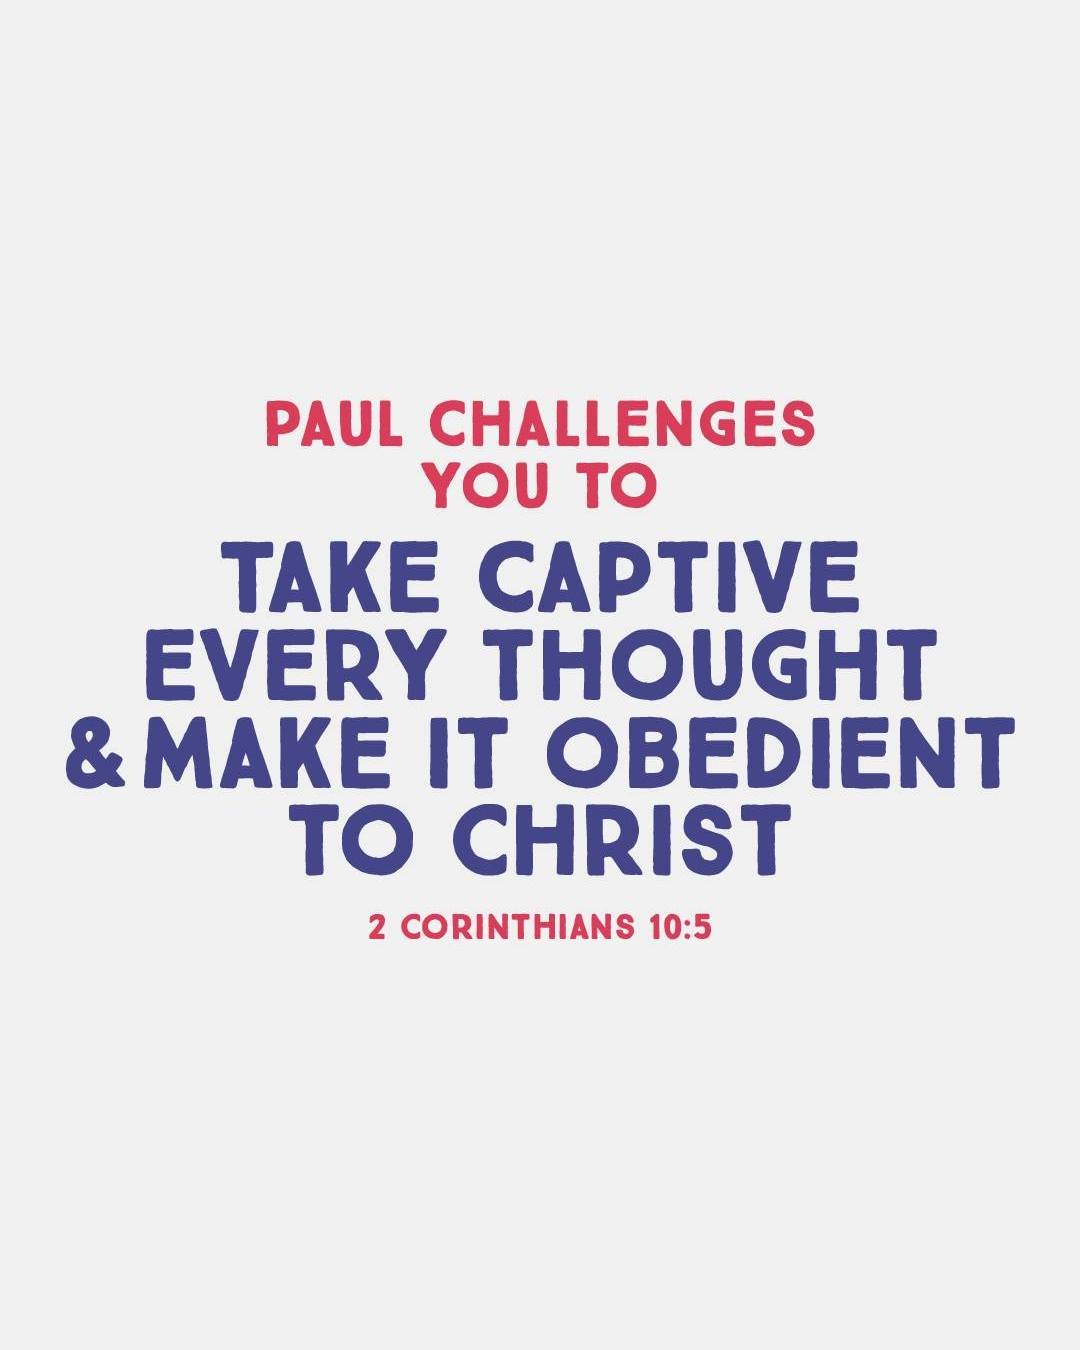 It's easy to fall into the negativity trap. Catch those negative thoughts before they take root. Paul invites us to a place of mutual upliftment and peace&mdash;a place of rejoicing that calms our hearts. 💙